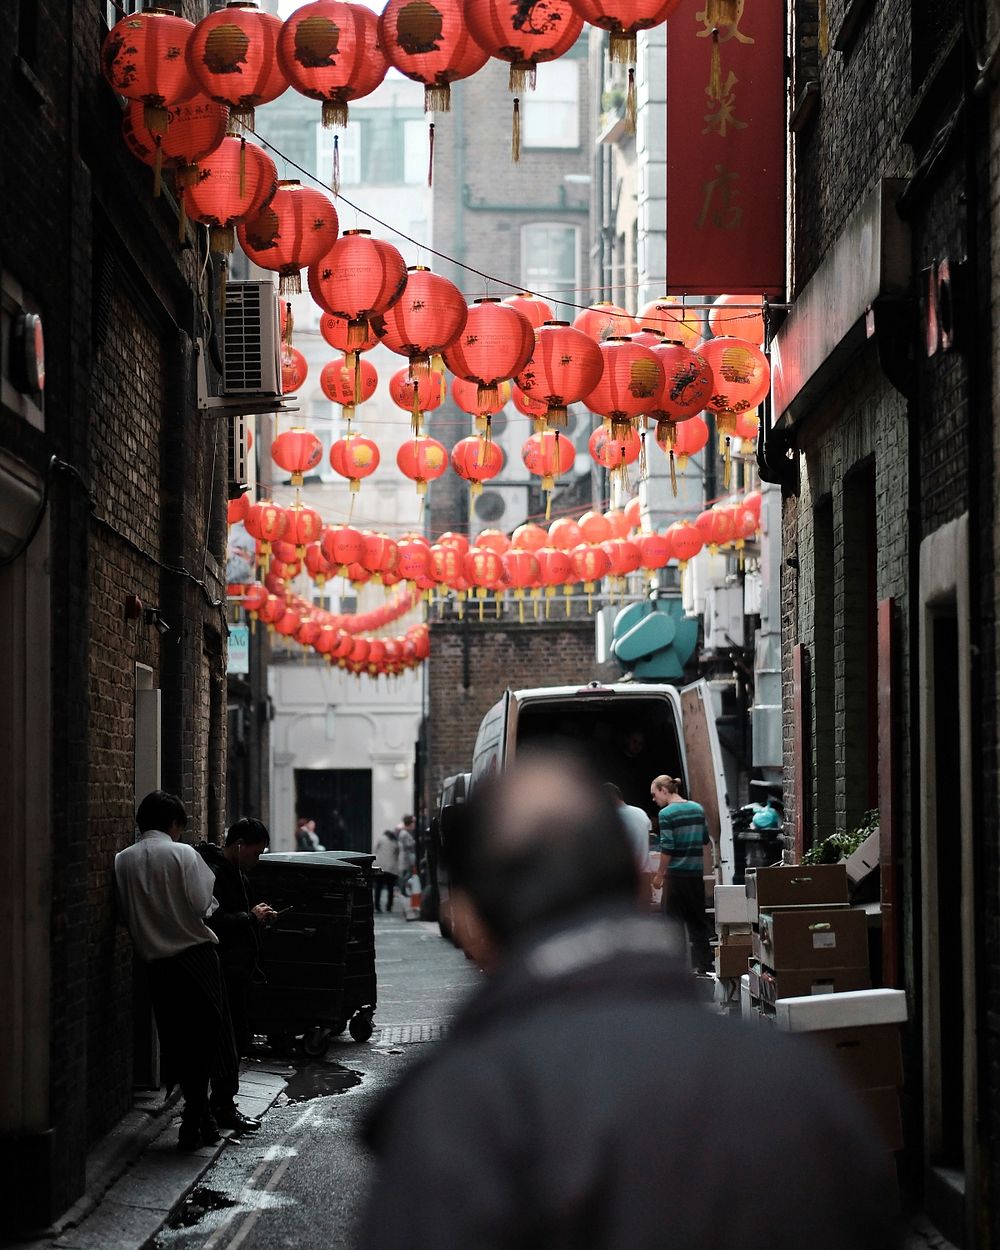 A man looks down an alleyway with strings of paper lanterns hung from the buildings. Original public domain image from…